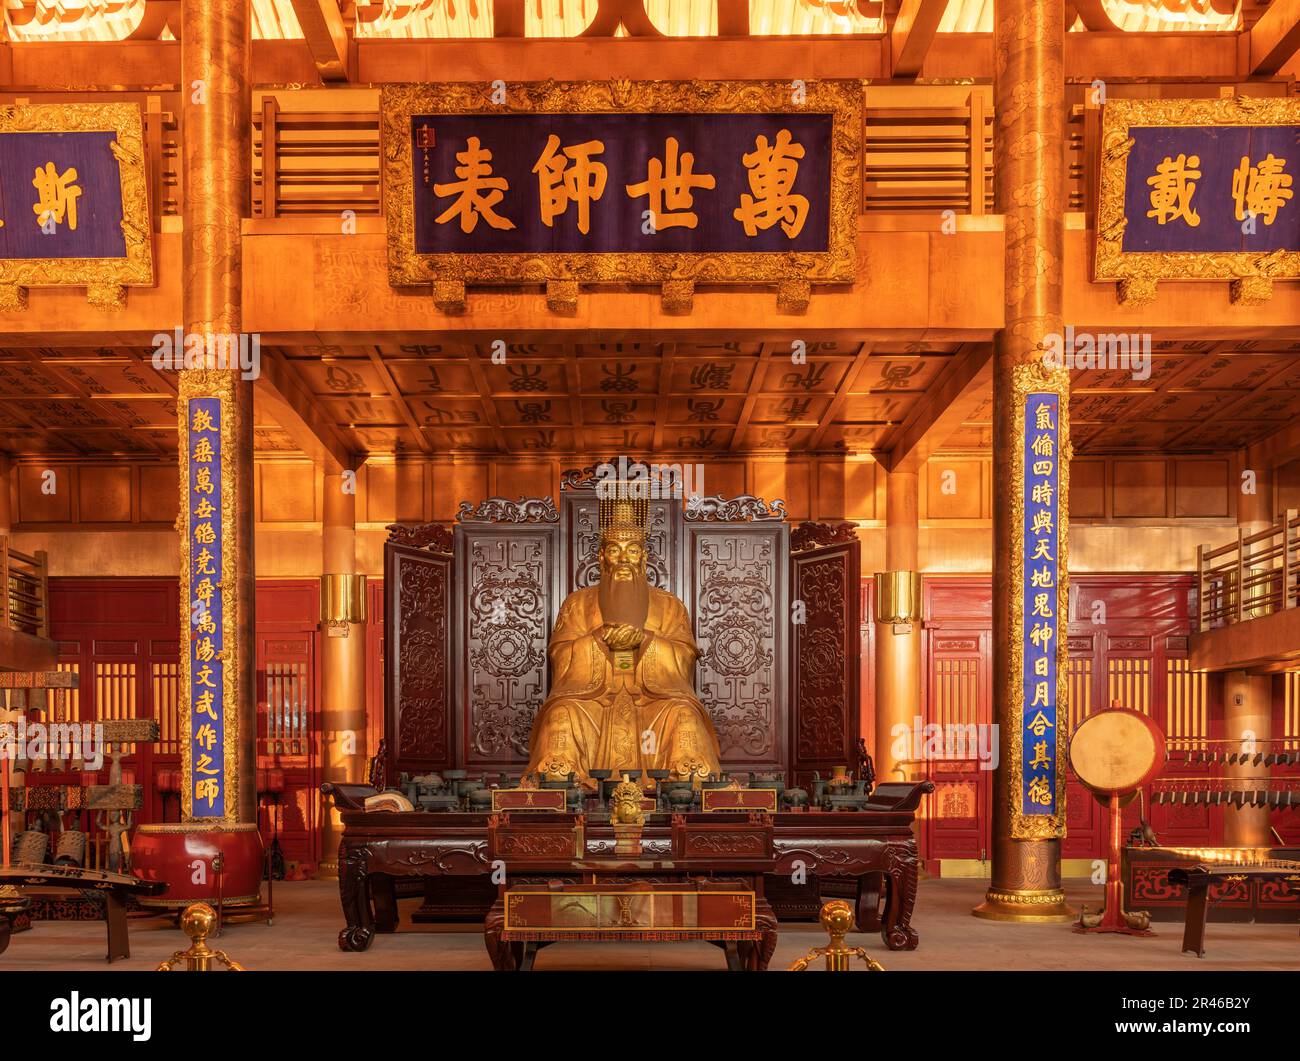 A bronze statue of the philosopher Confucius is the centerpiece of the Confucian Temple in Liuzhou, Guangxi, China Stock Photo